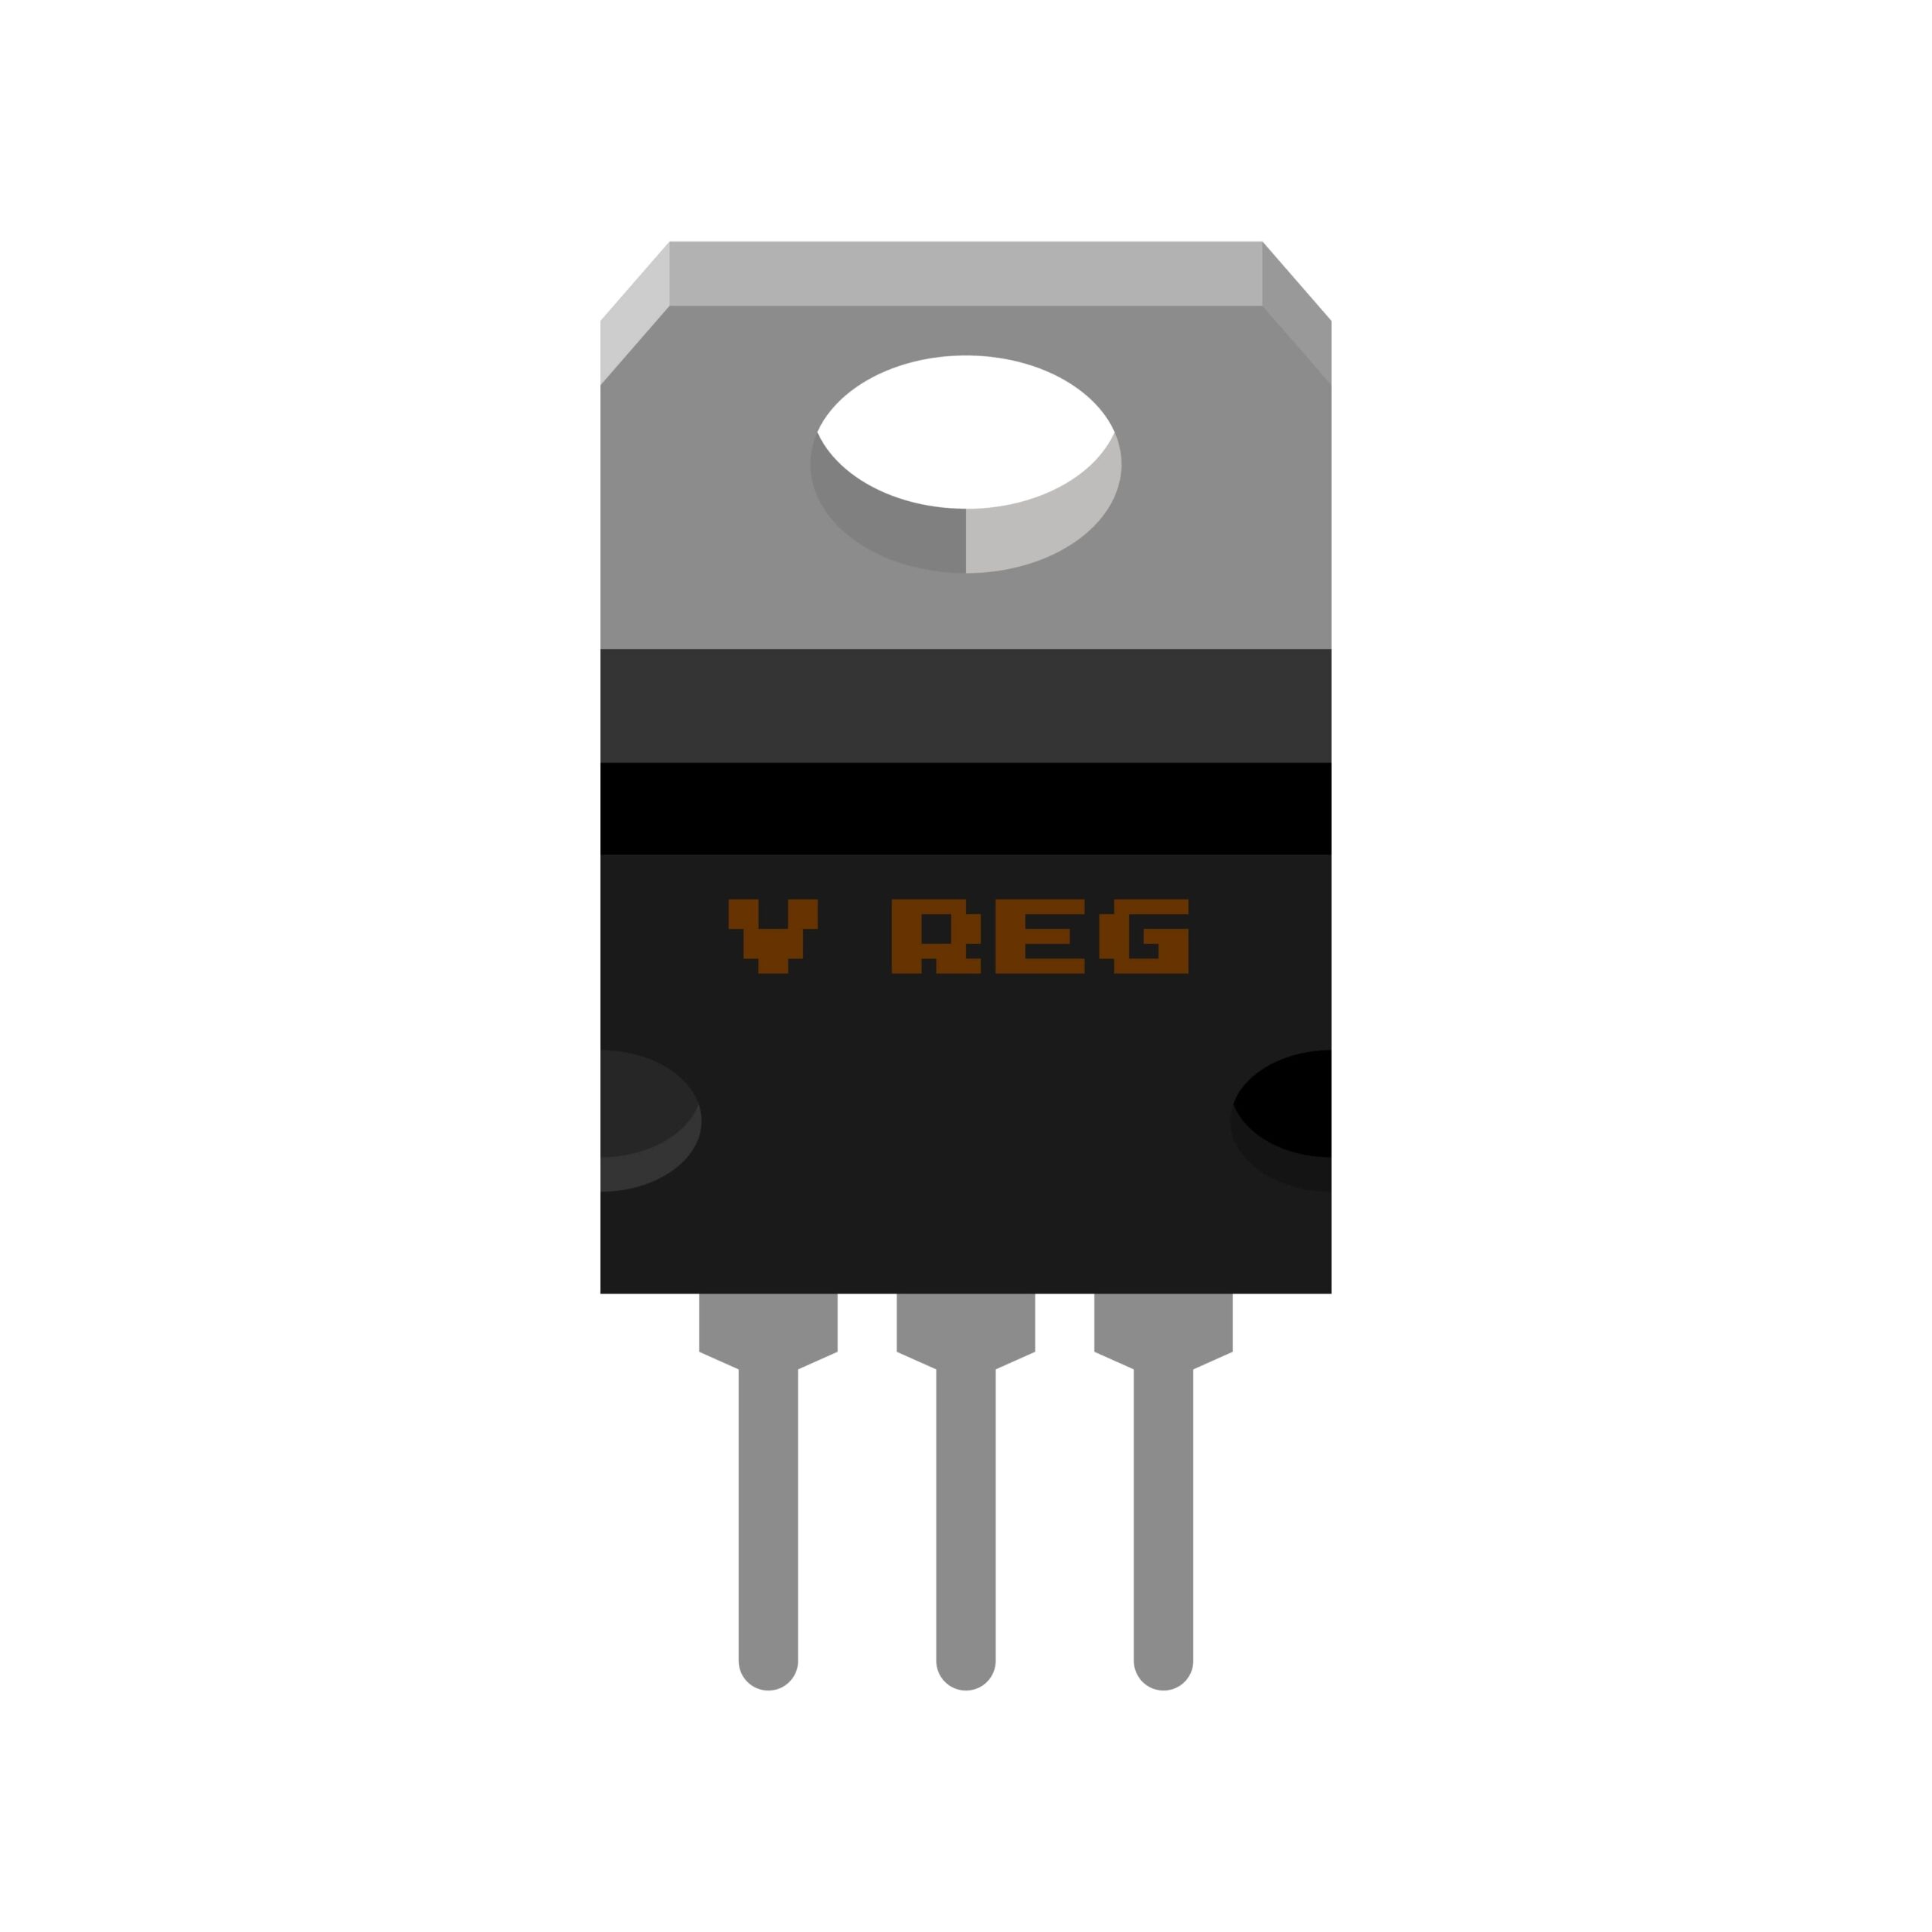 Voltage regulators are critical power supply operation circuit elements.